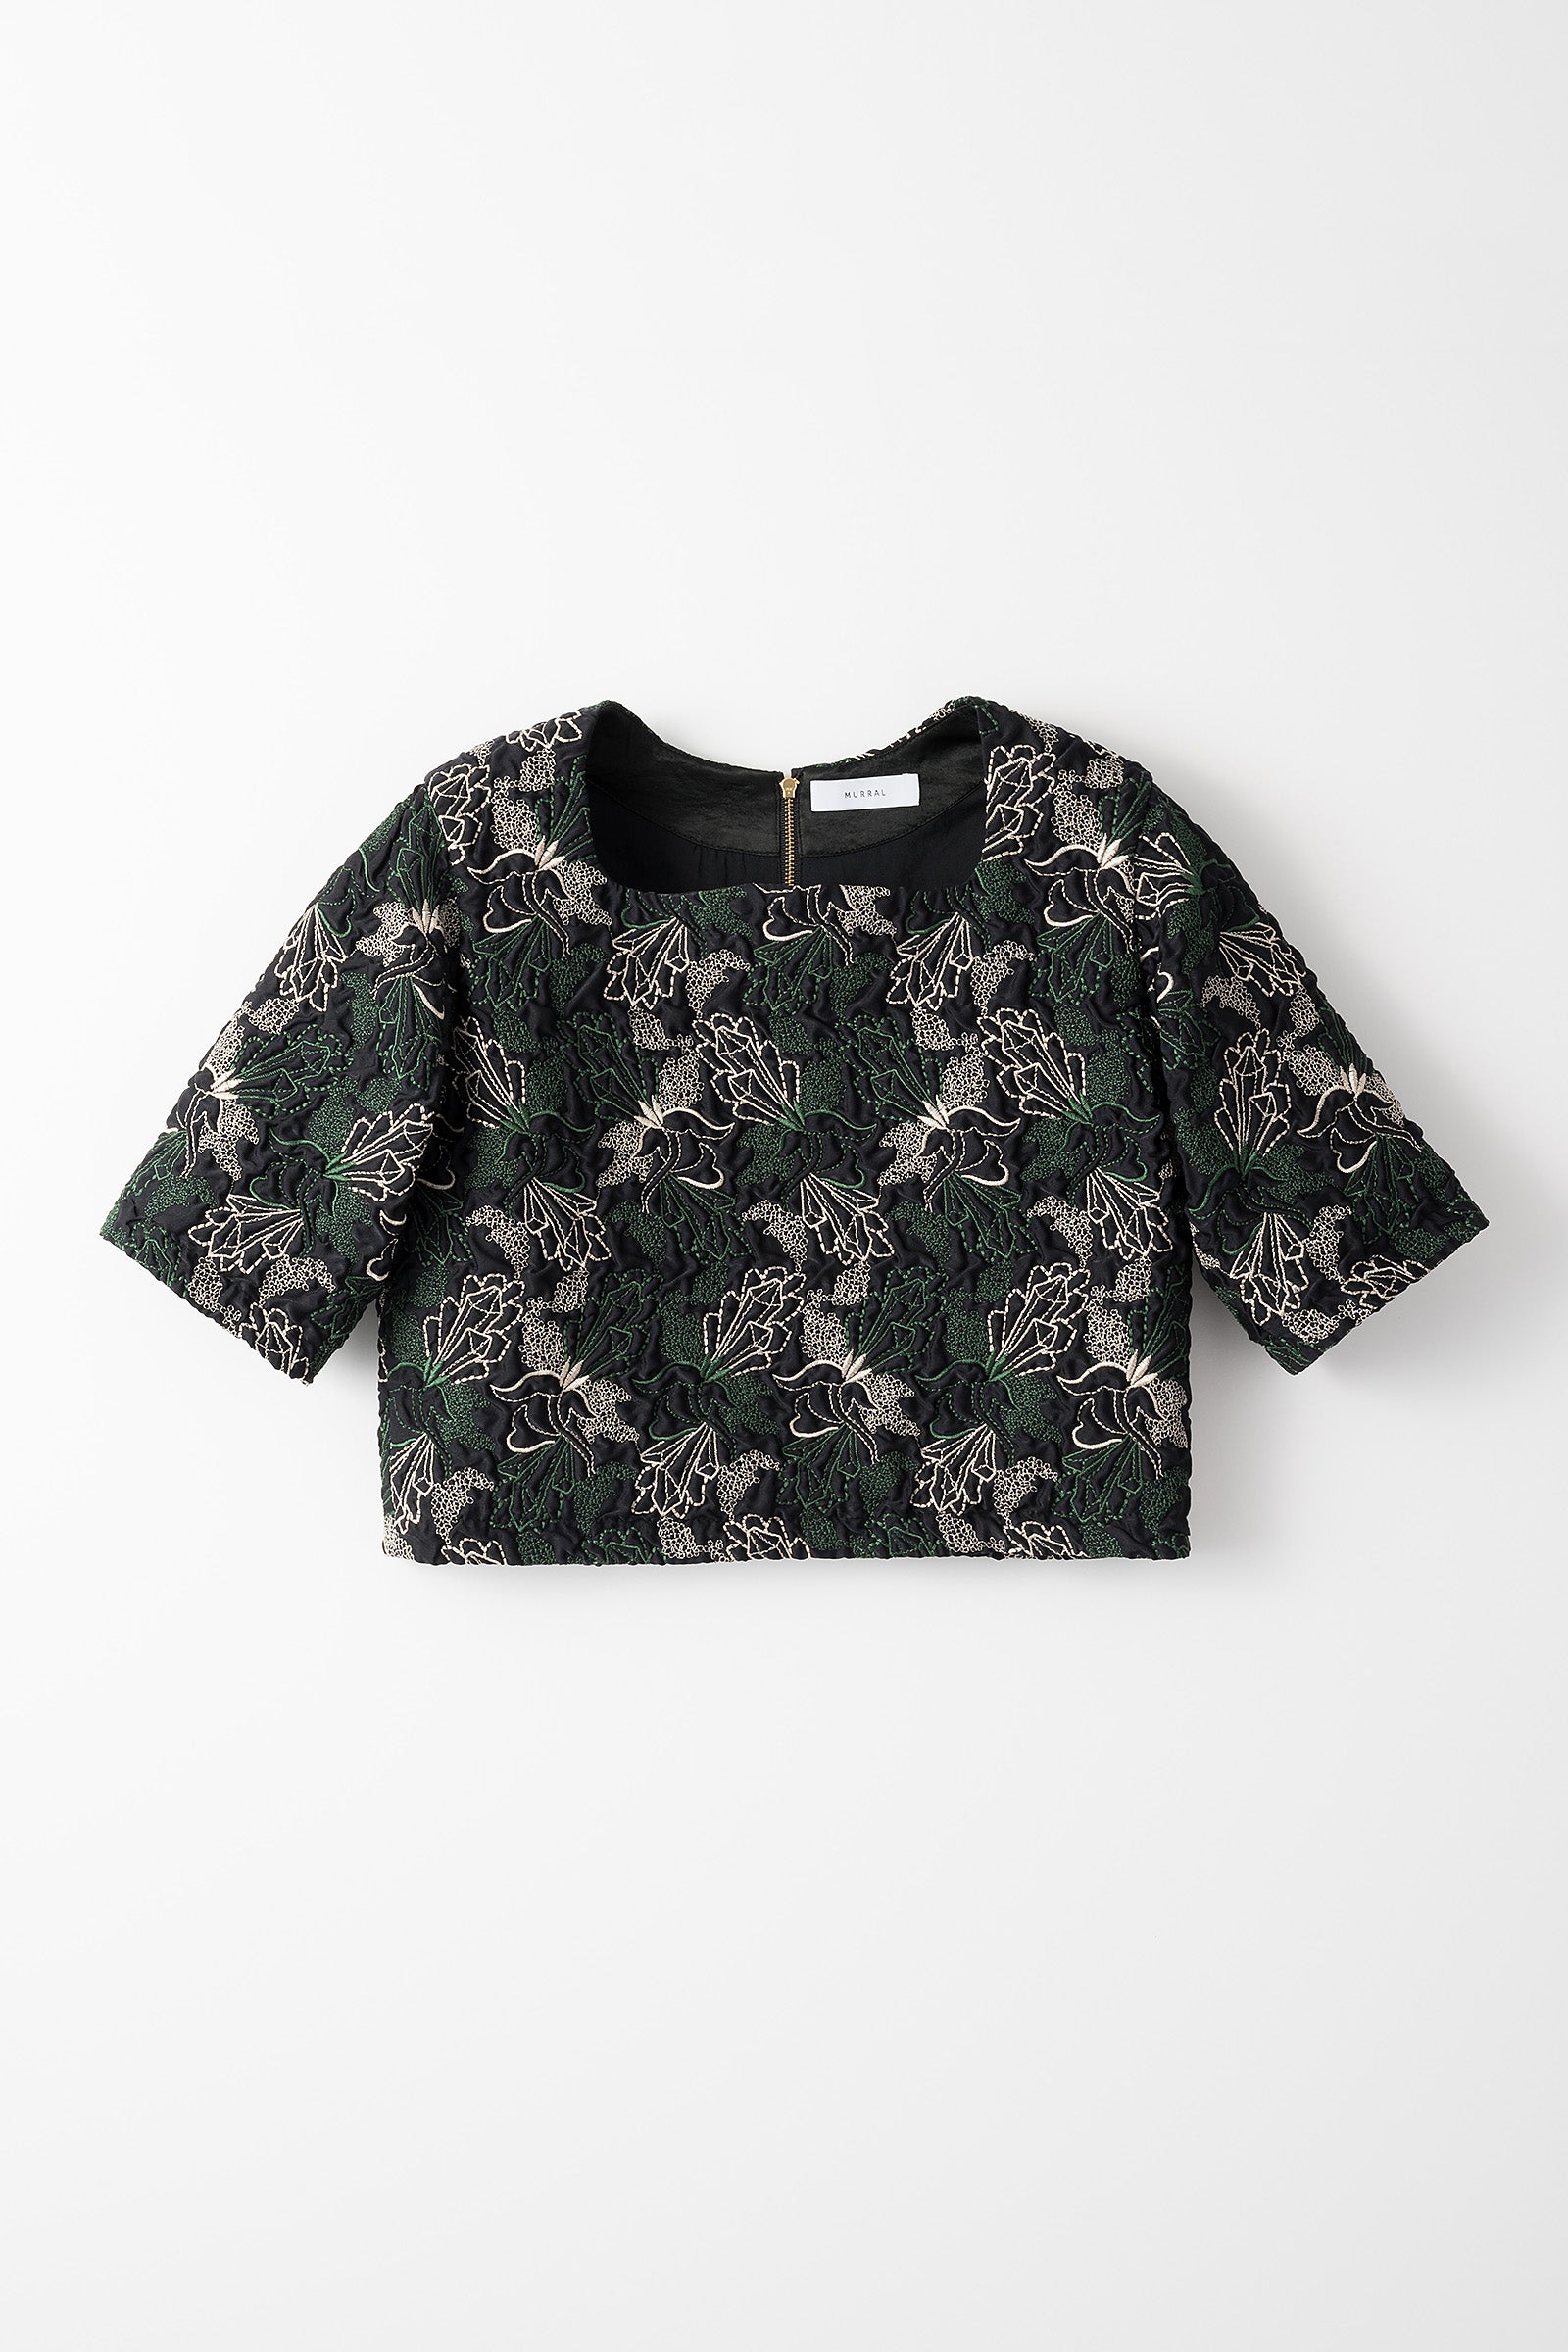 MIDWESTミッドウエスト【新品未使用タグ付き】MURRAL quartz embroidery tops